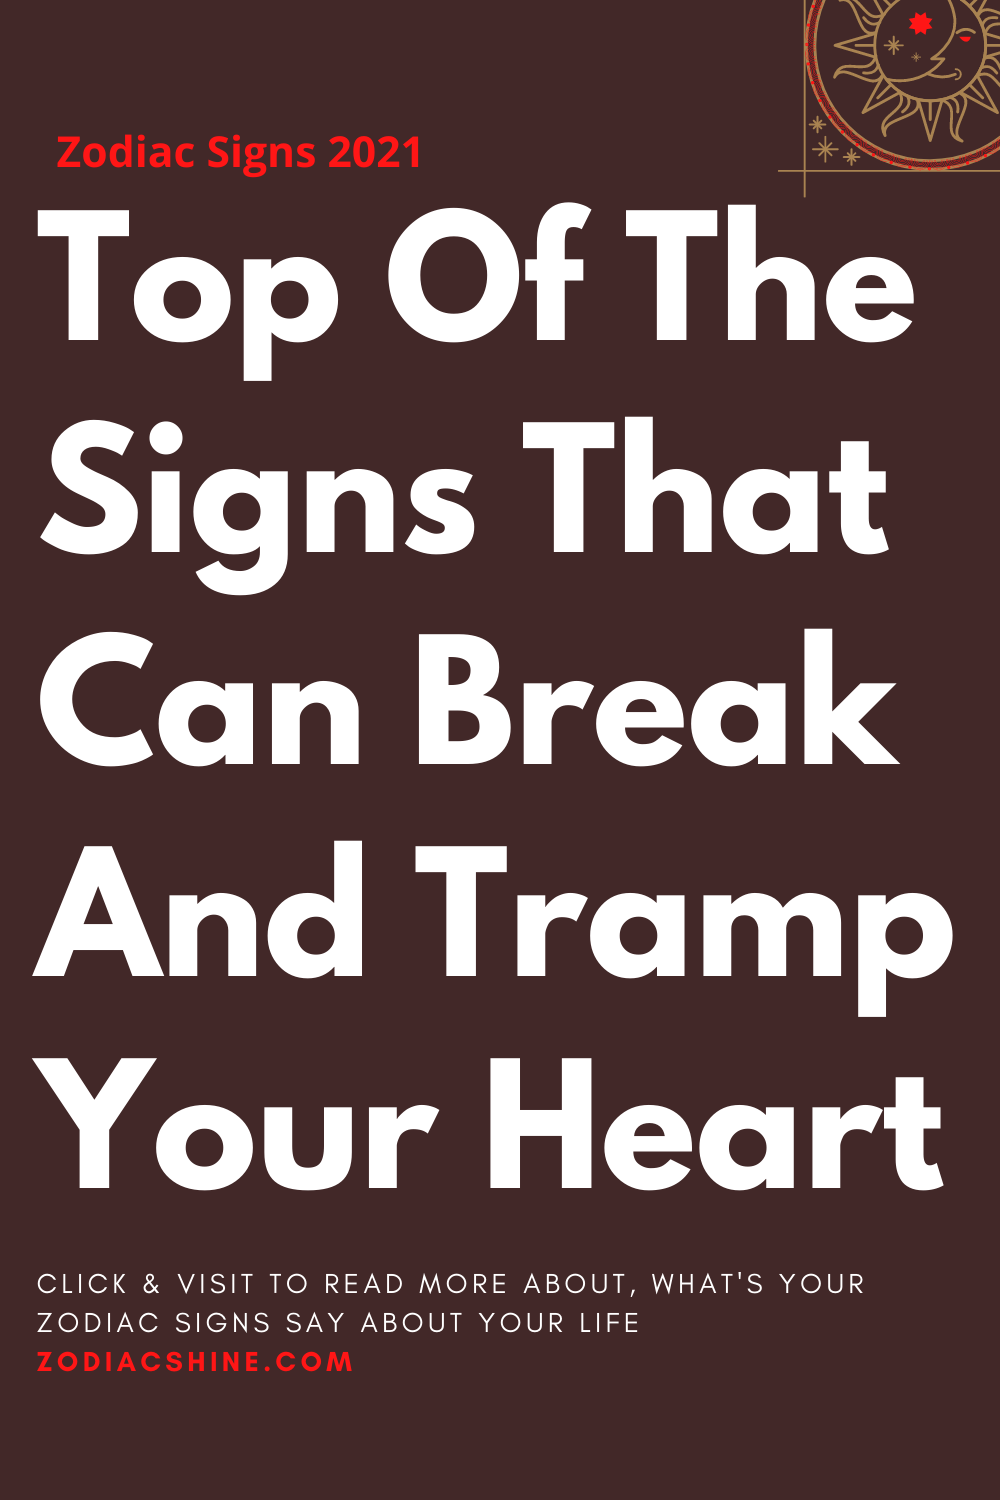 Top Of The Signs That Can Break And Tramp Your Heart